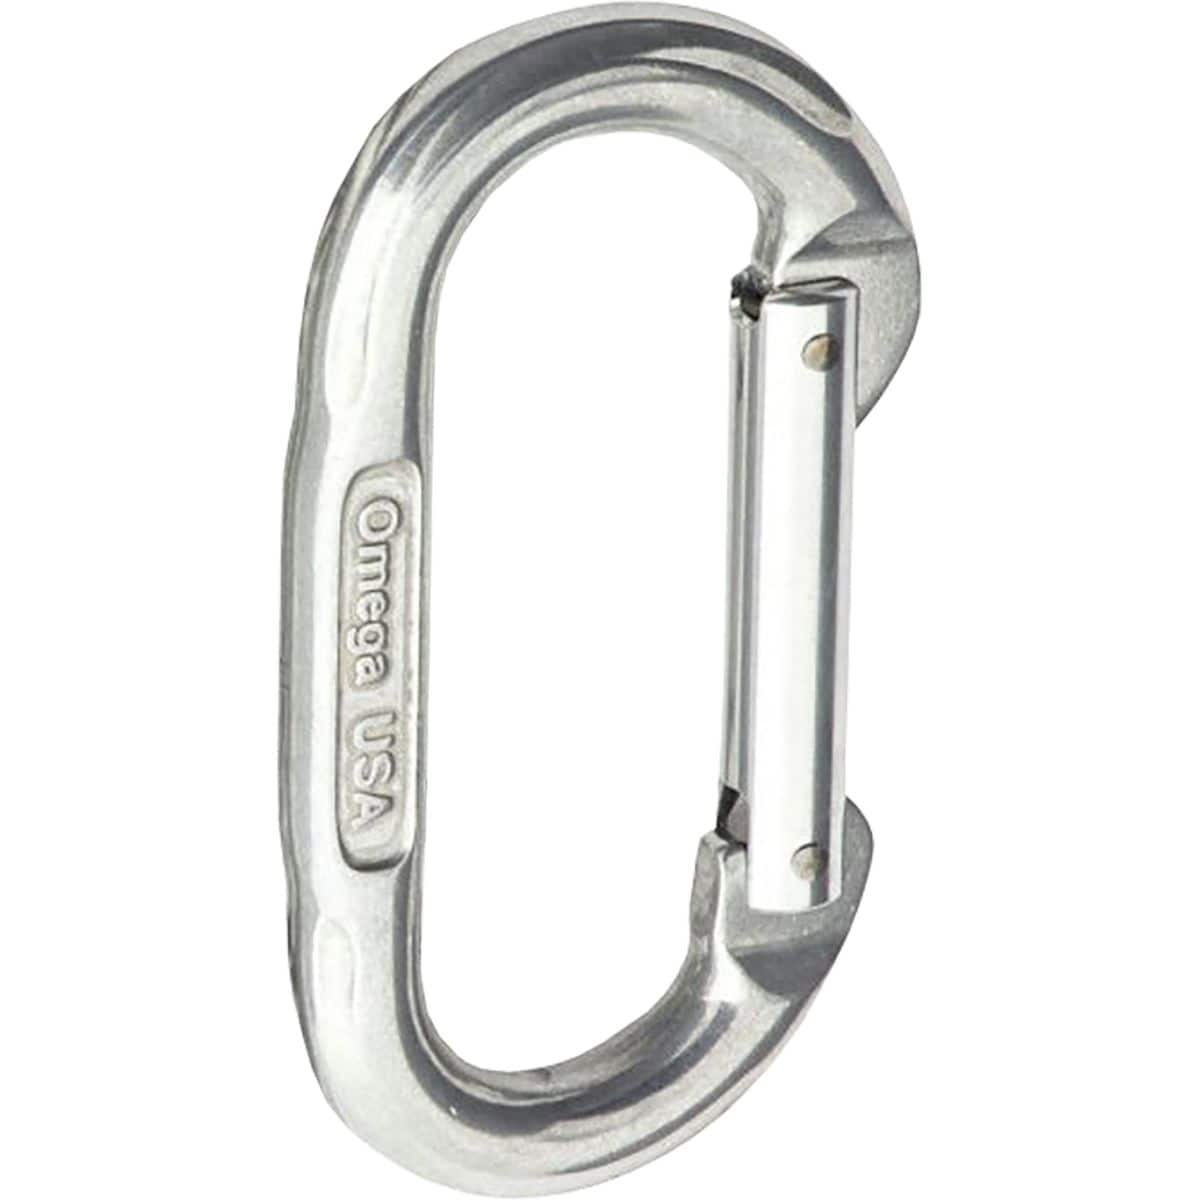 Omega Pacific Oval Straightgate Carabiner - 6-Pack - Climb